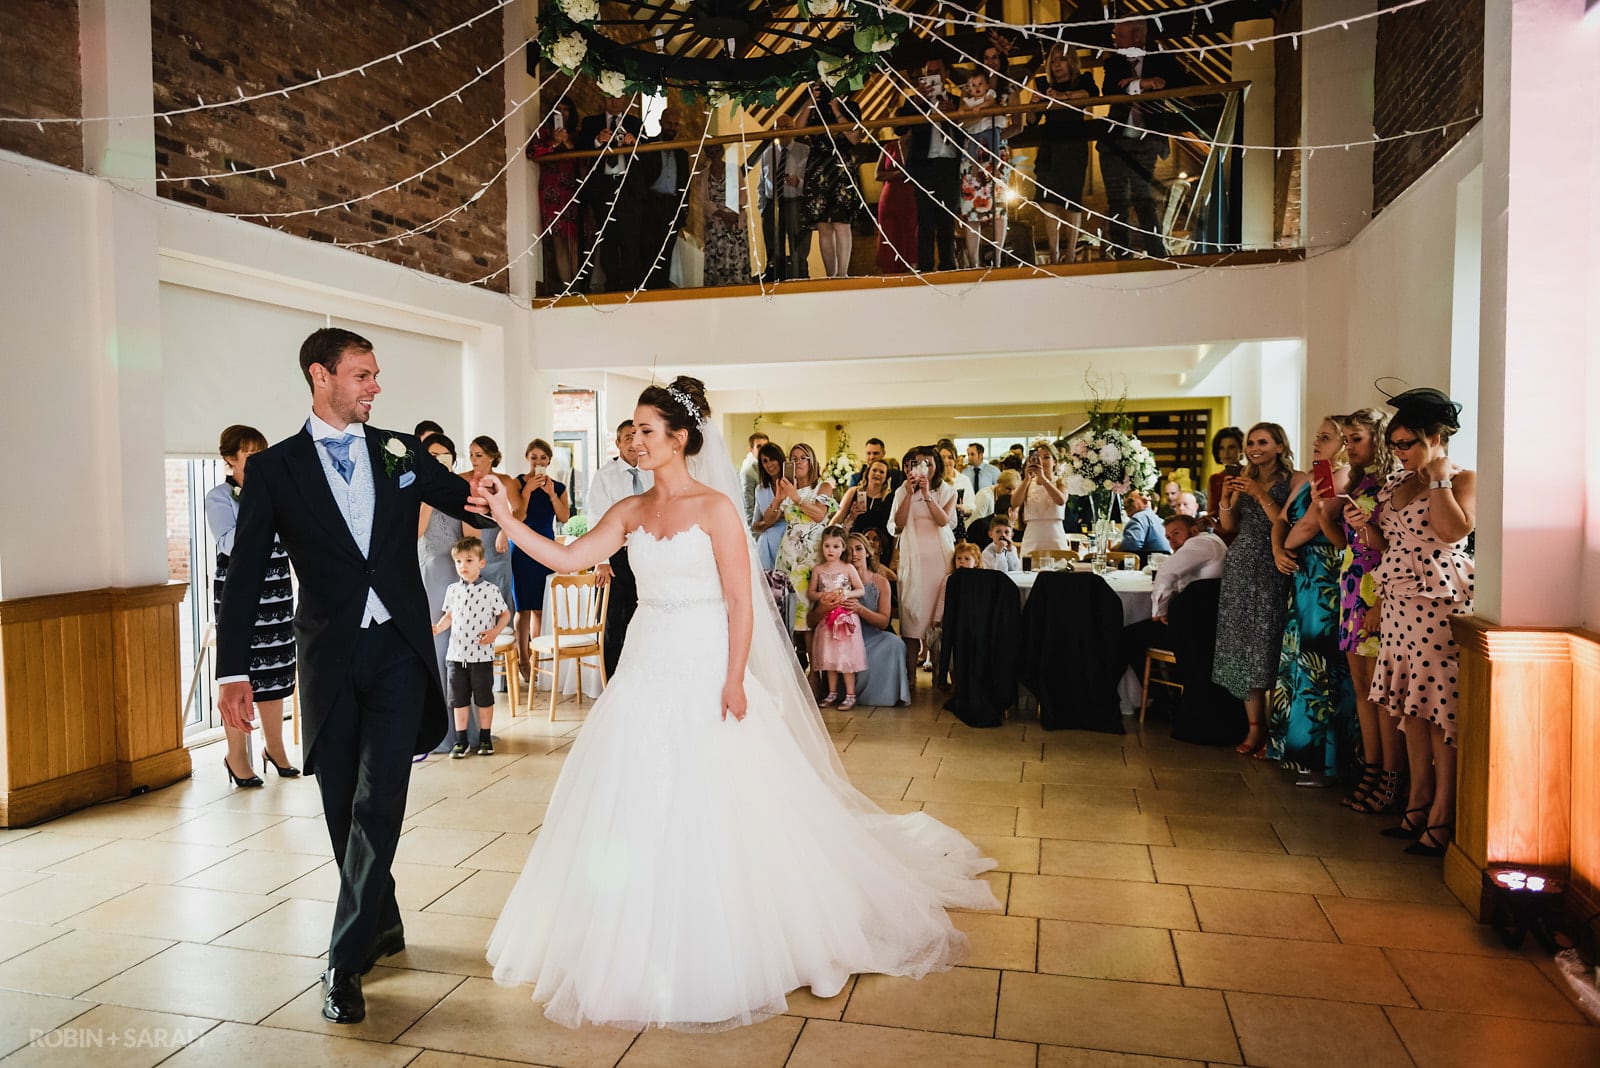 Bride and groom first dance at Delbury Hall